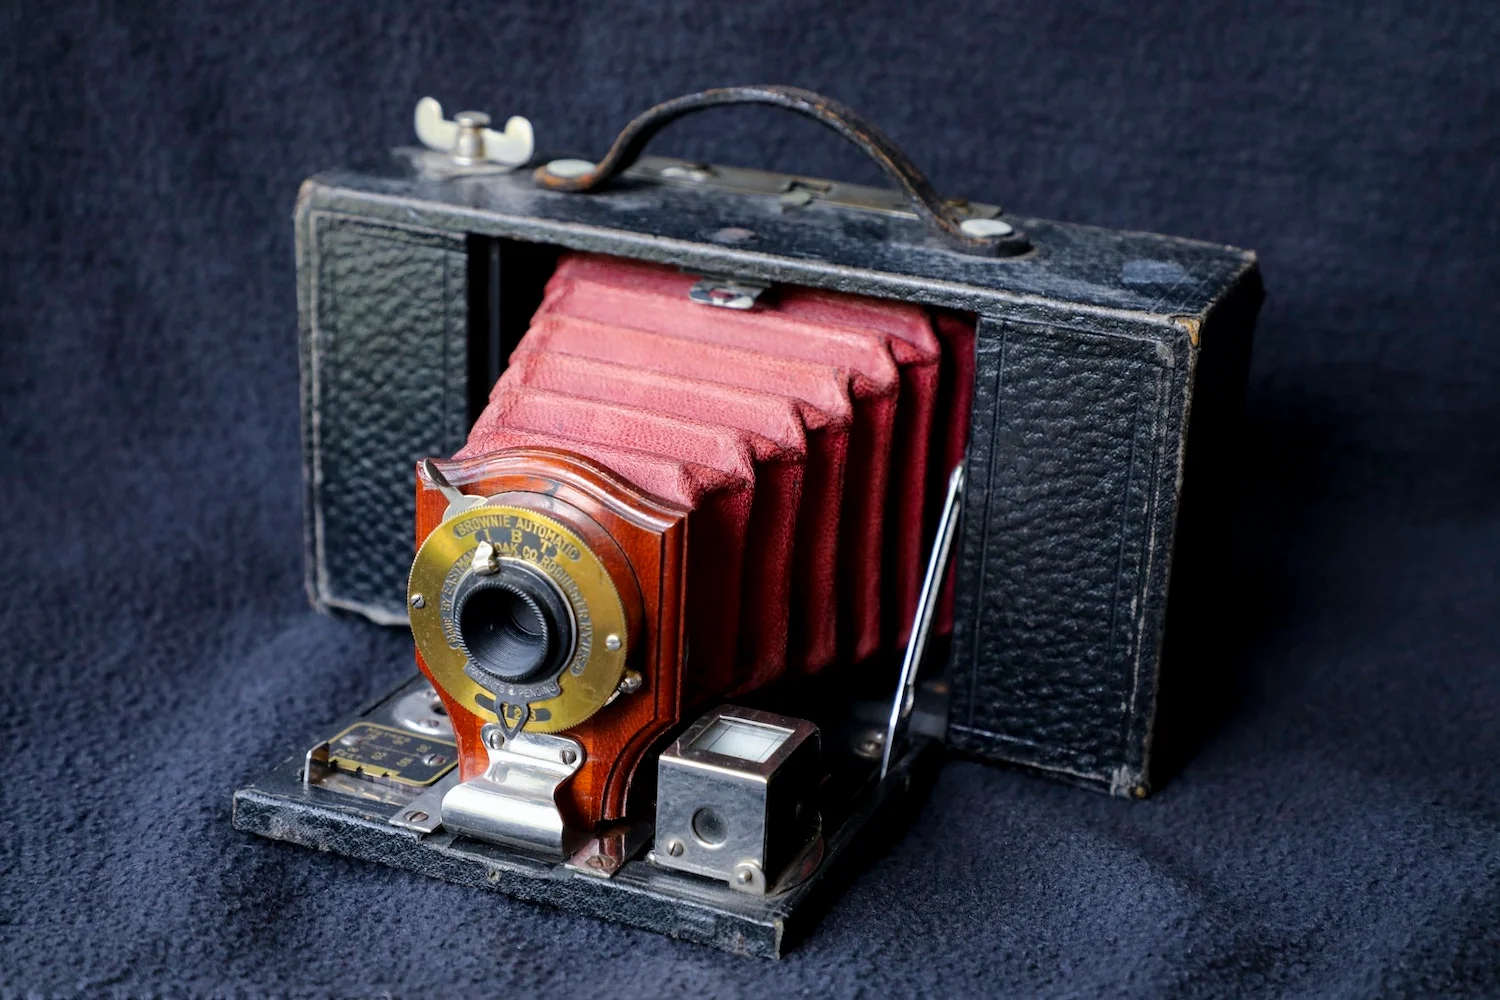 When was the camera invented? Frenchman invented first camera in 1816.